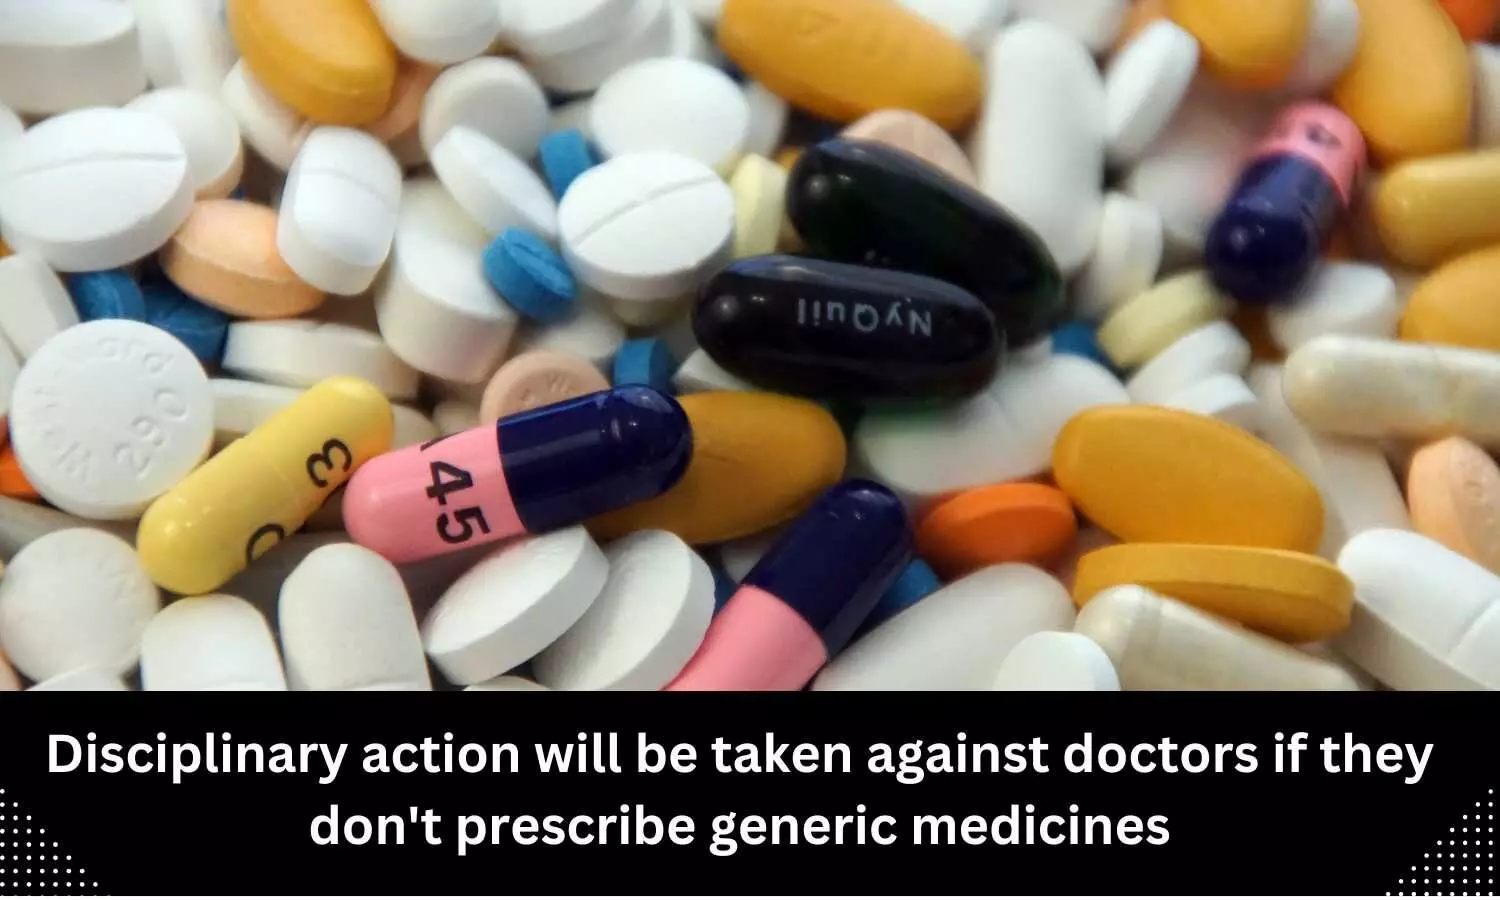 Doctors to face disciplinary action if they don't prescribe